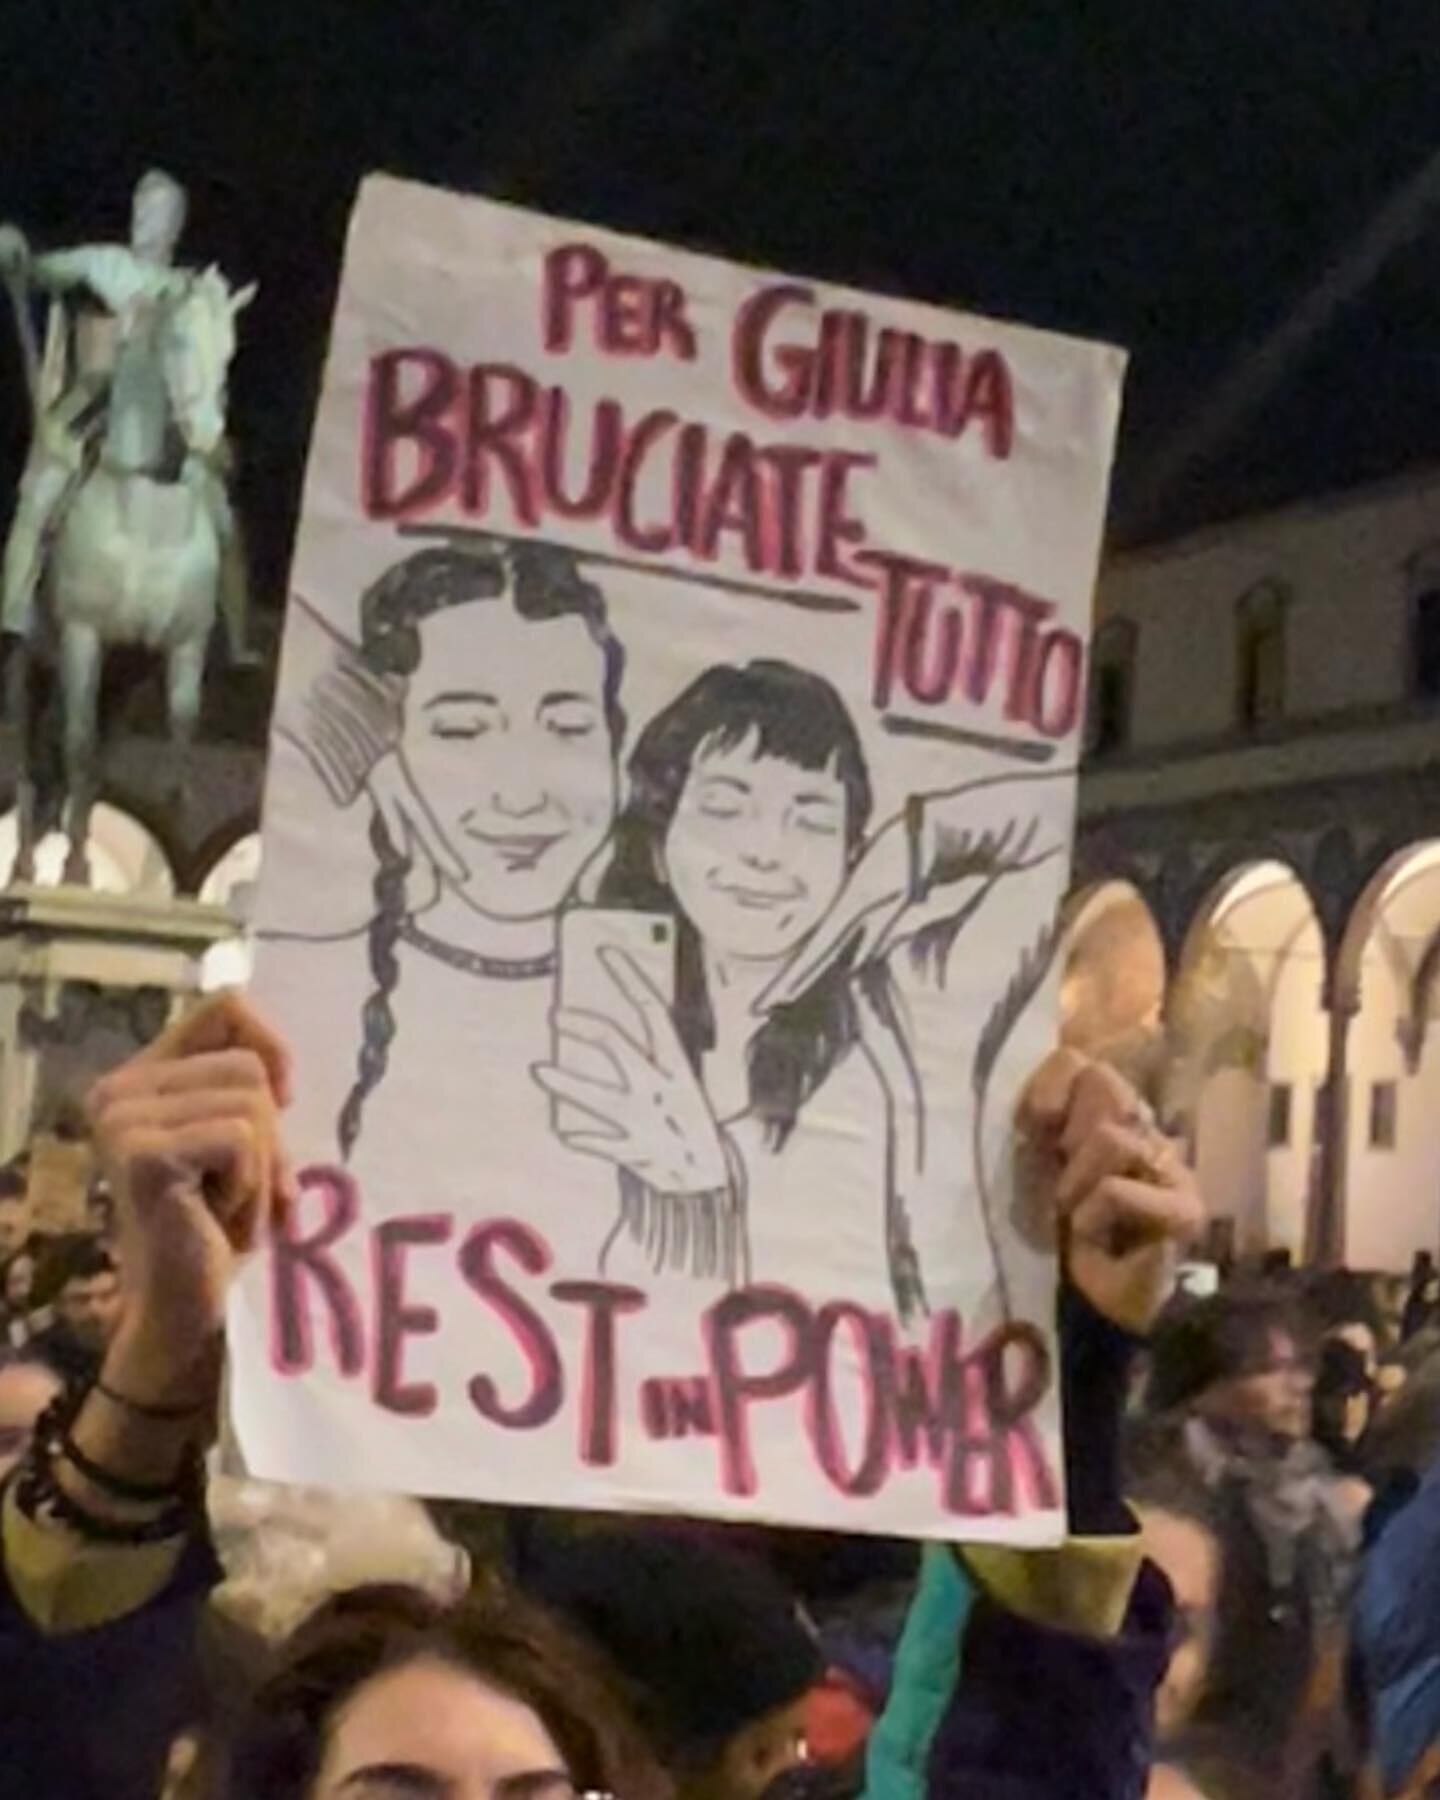 Donna, Vita, Libert&agrave;: unfortunately a need for another protest, this time the noise of several generations laced through the city &ldquo;because silence is not enough&rdquo; to combat the rash of femicide, and in honor of 22-year-old Giulia Ce